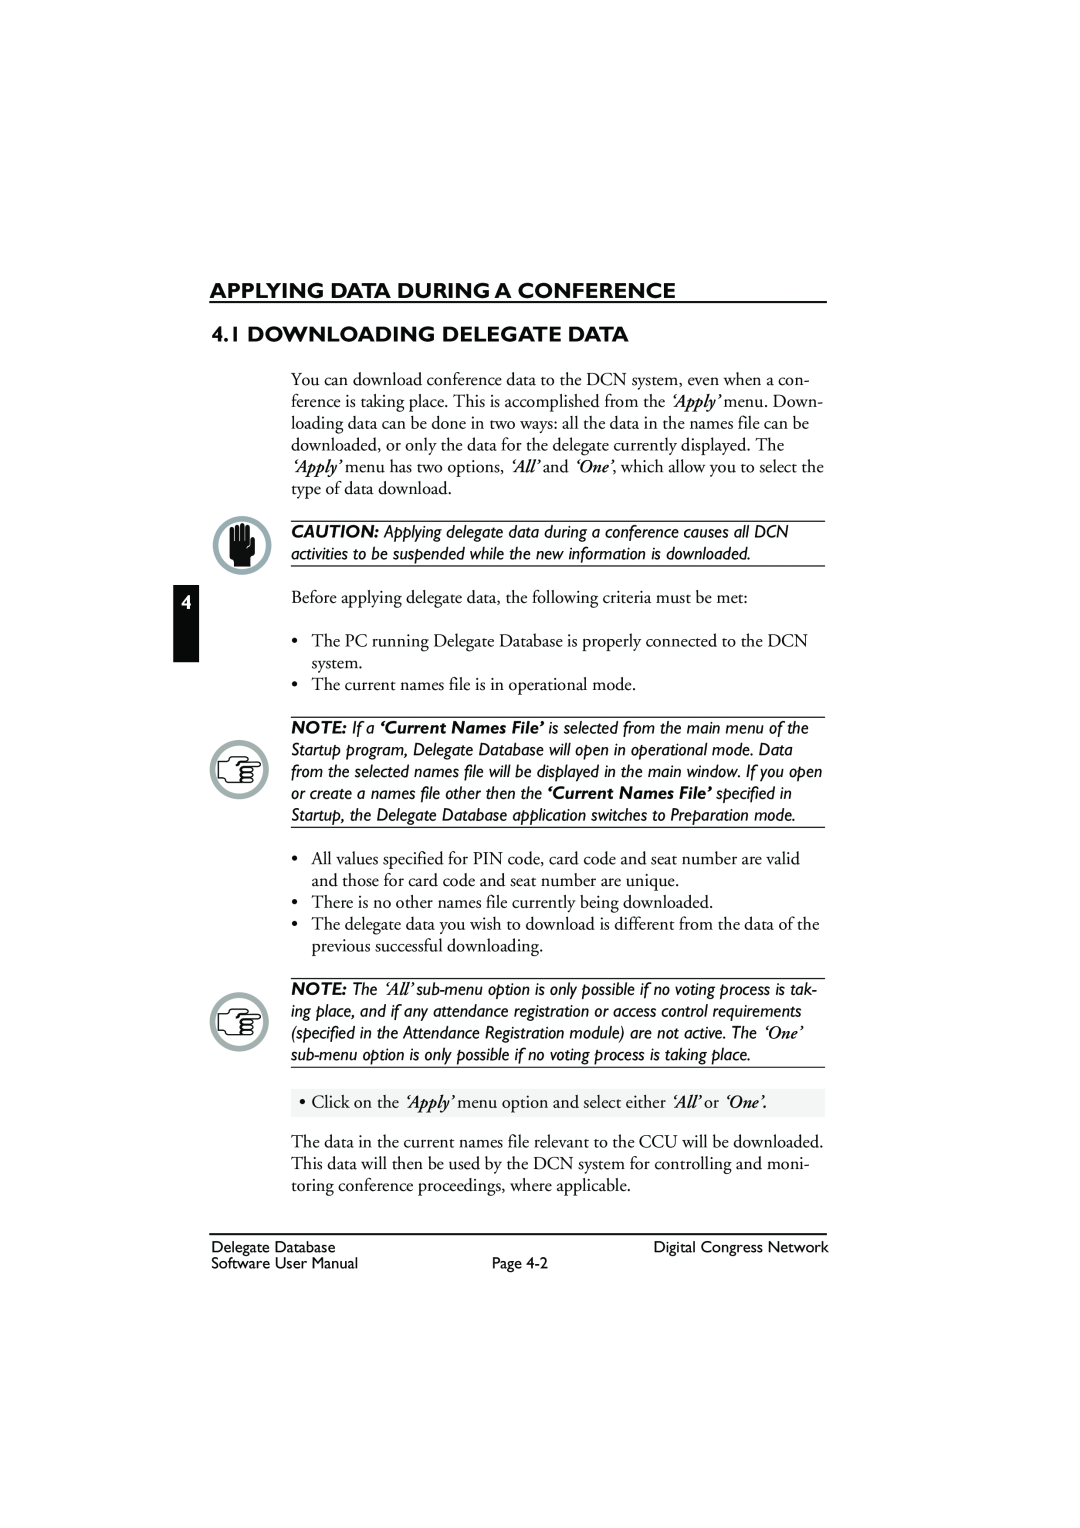 Bosch Appliances LBB3580 user manual Applying Data During A Conference, Downloading Delegate Data 